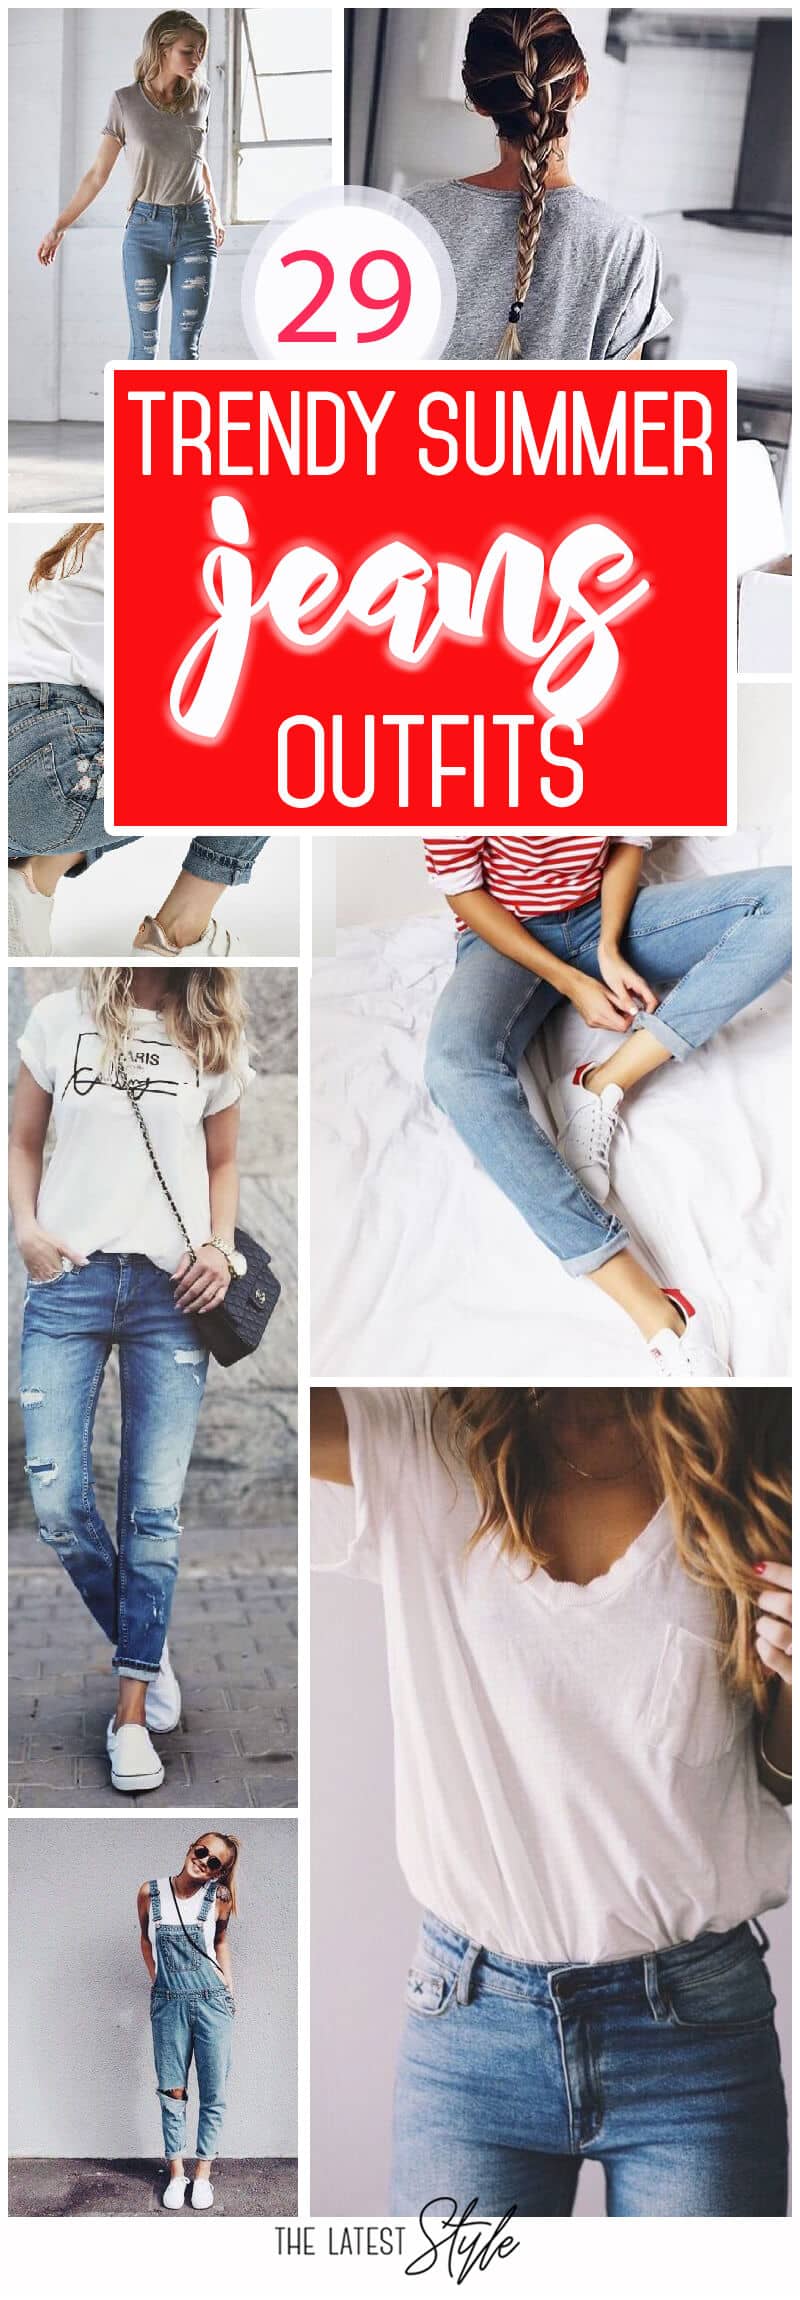 29 Trendy Jeans Outfits For Summer